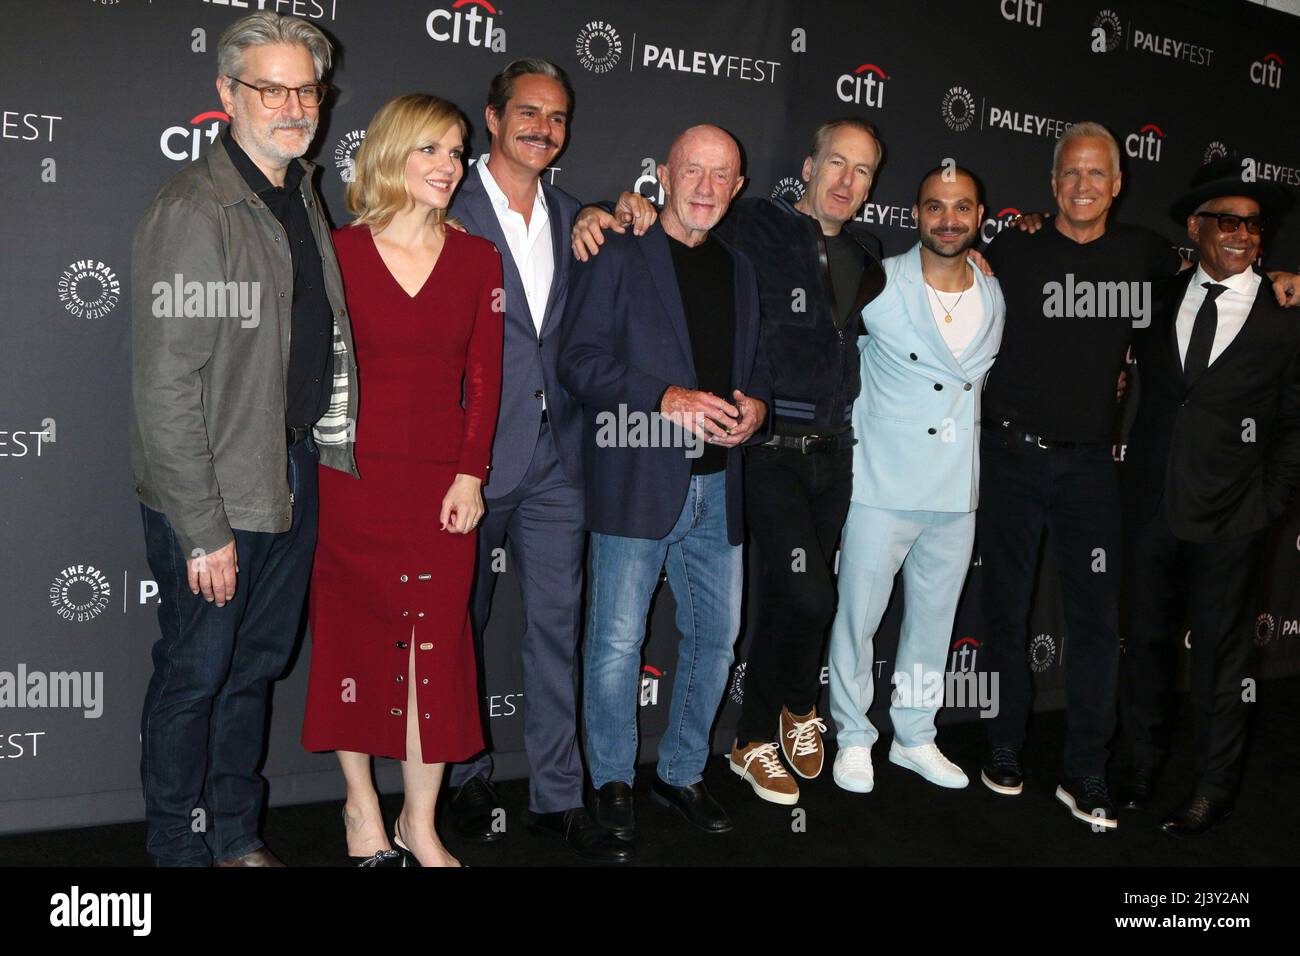 Los Angeles, CA. 9th Apr, 2022. Peter Gould, Rhea Seehorn, Tony Dalton, Johnathan Banks, Bob Odenkirk, Michael Mando, Patrick Fabian, Giancarlo Esposito at arrivals for BETTER CALL SAUL at PaleyFest LA 2022, Dolby Theatre, Los Angeles, CA April 9, 2022. Credit: Priscilla Grant/Everett Collection/Alamy Live News Stock Photo